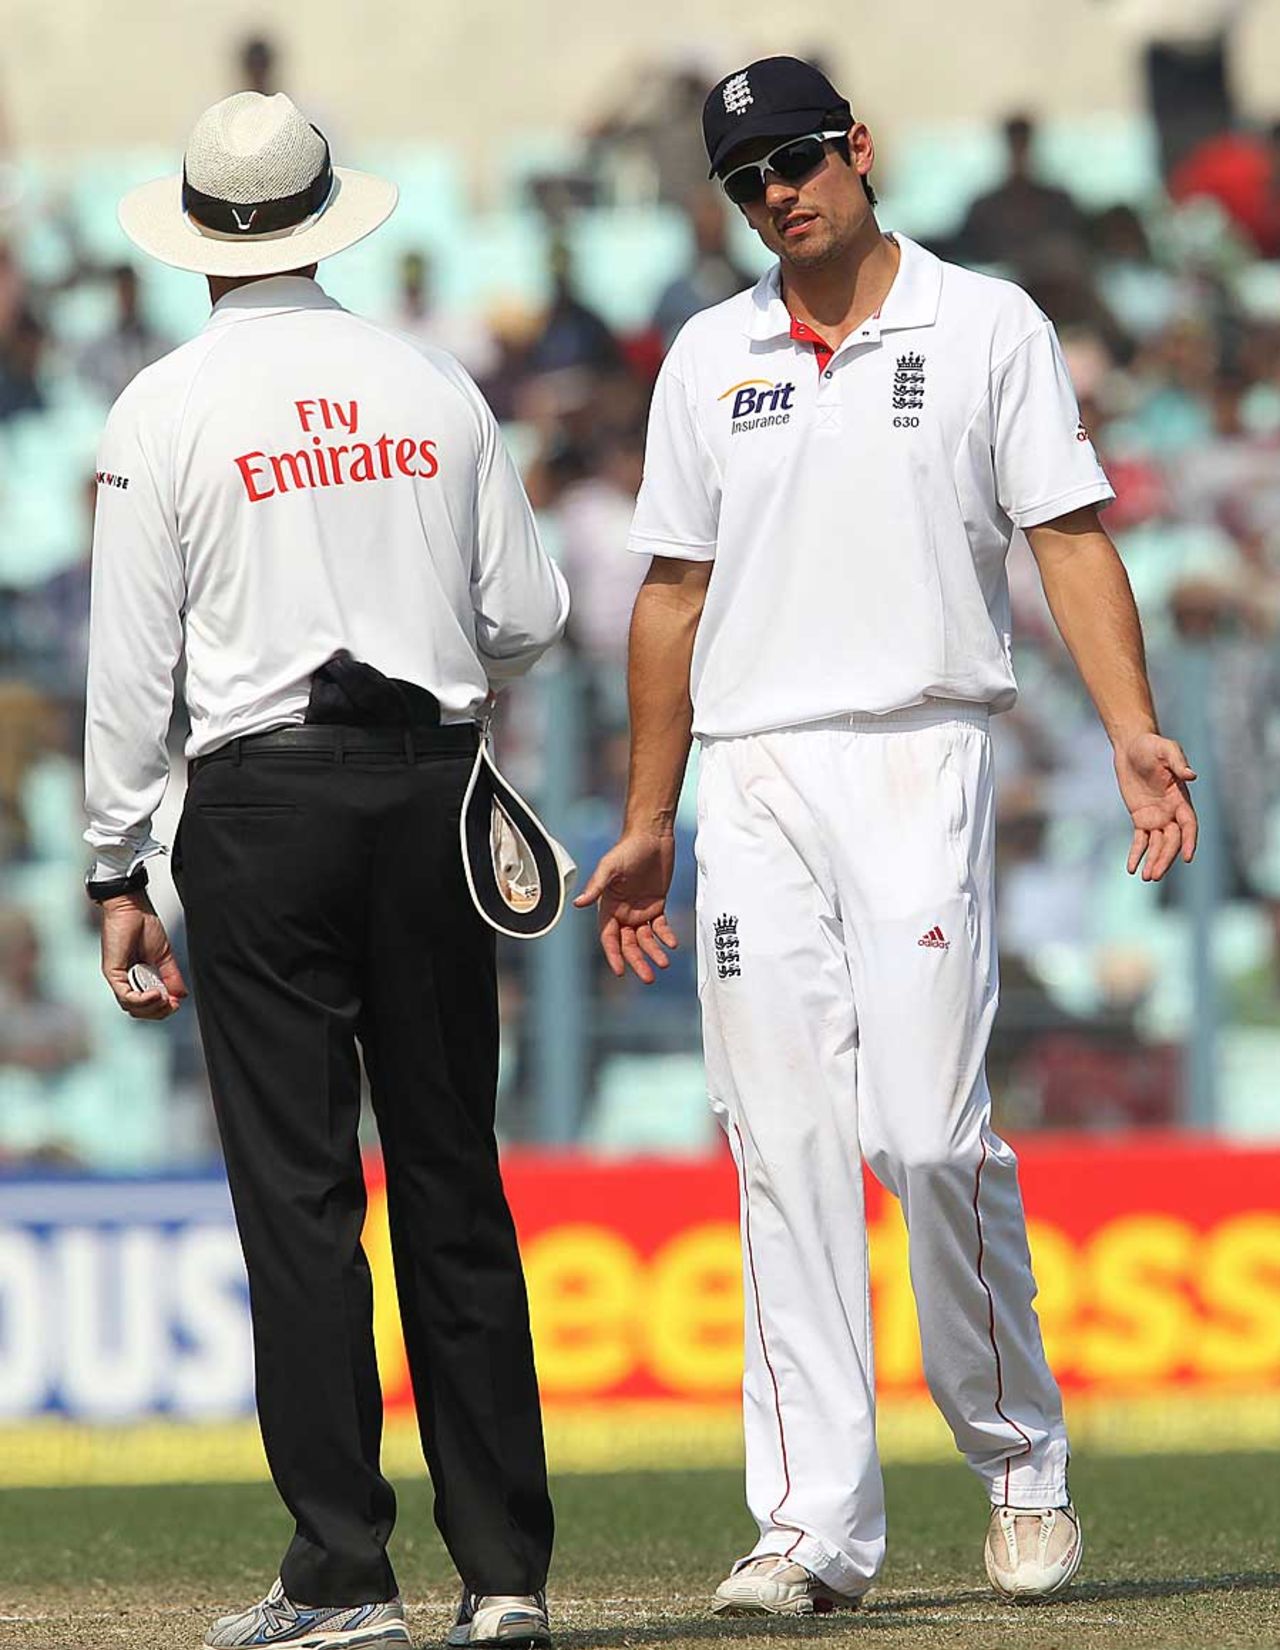 Alastair Cook has a word with the umpire after an appeal against Gautam Gambhir, India v England, 3rd Test, Kolkata, 4th day, December 8, 2012